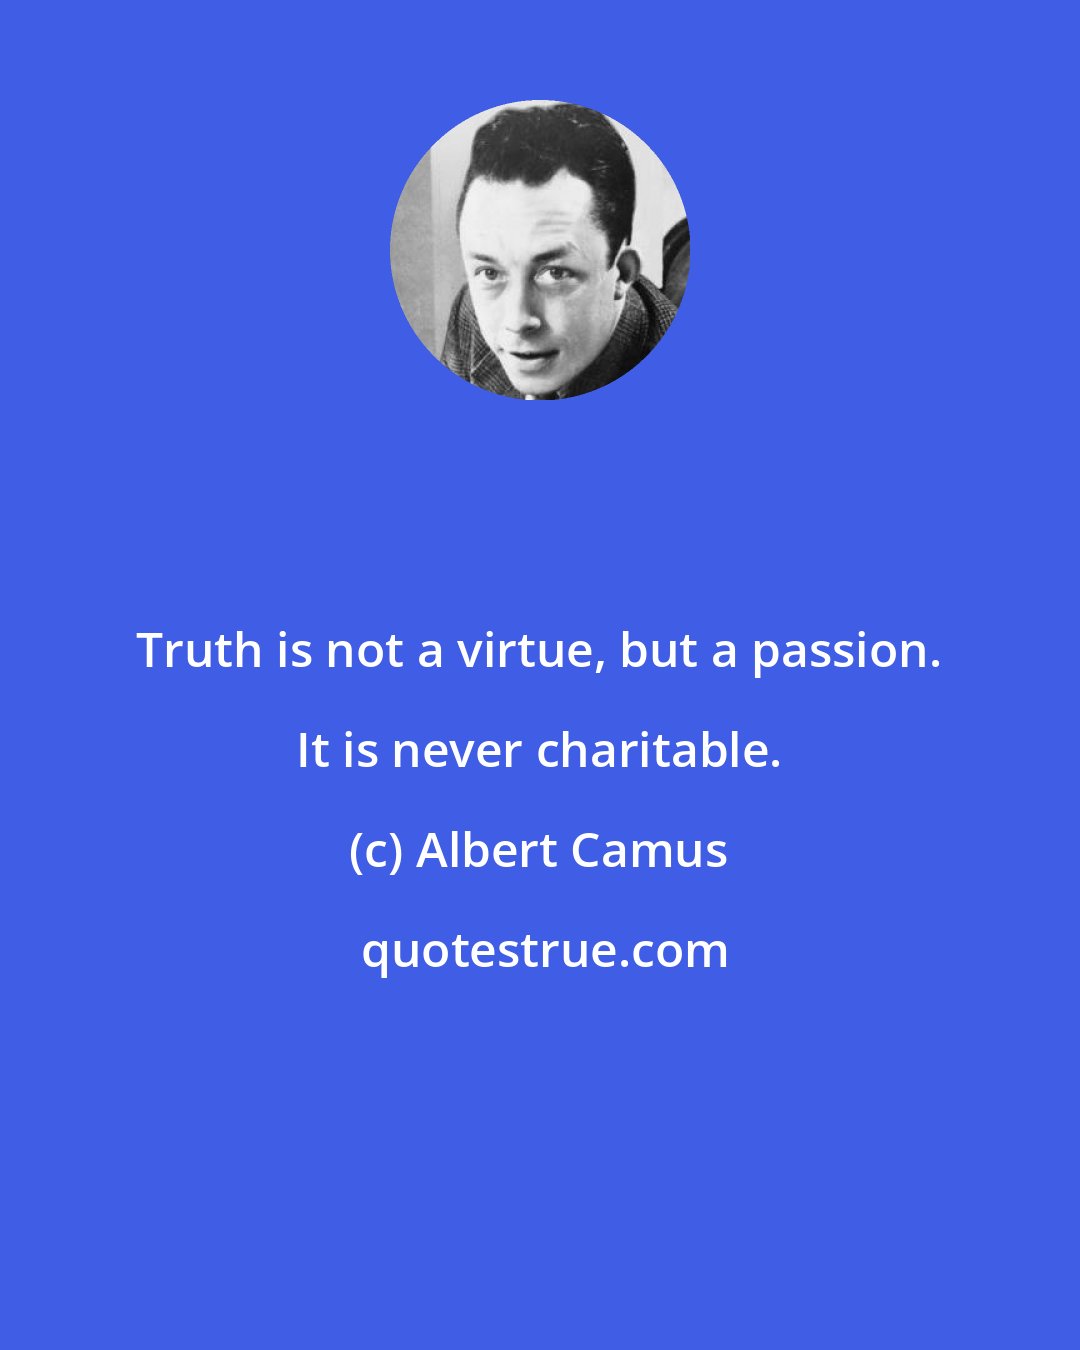 Albert Camus: Truth is not a virtue, but a passion. It is never charitable.